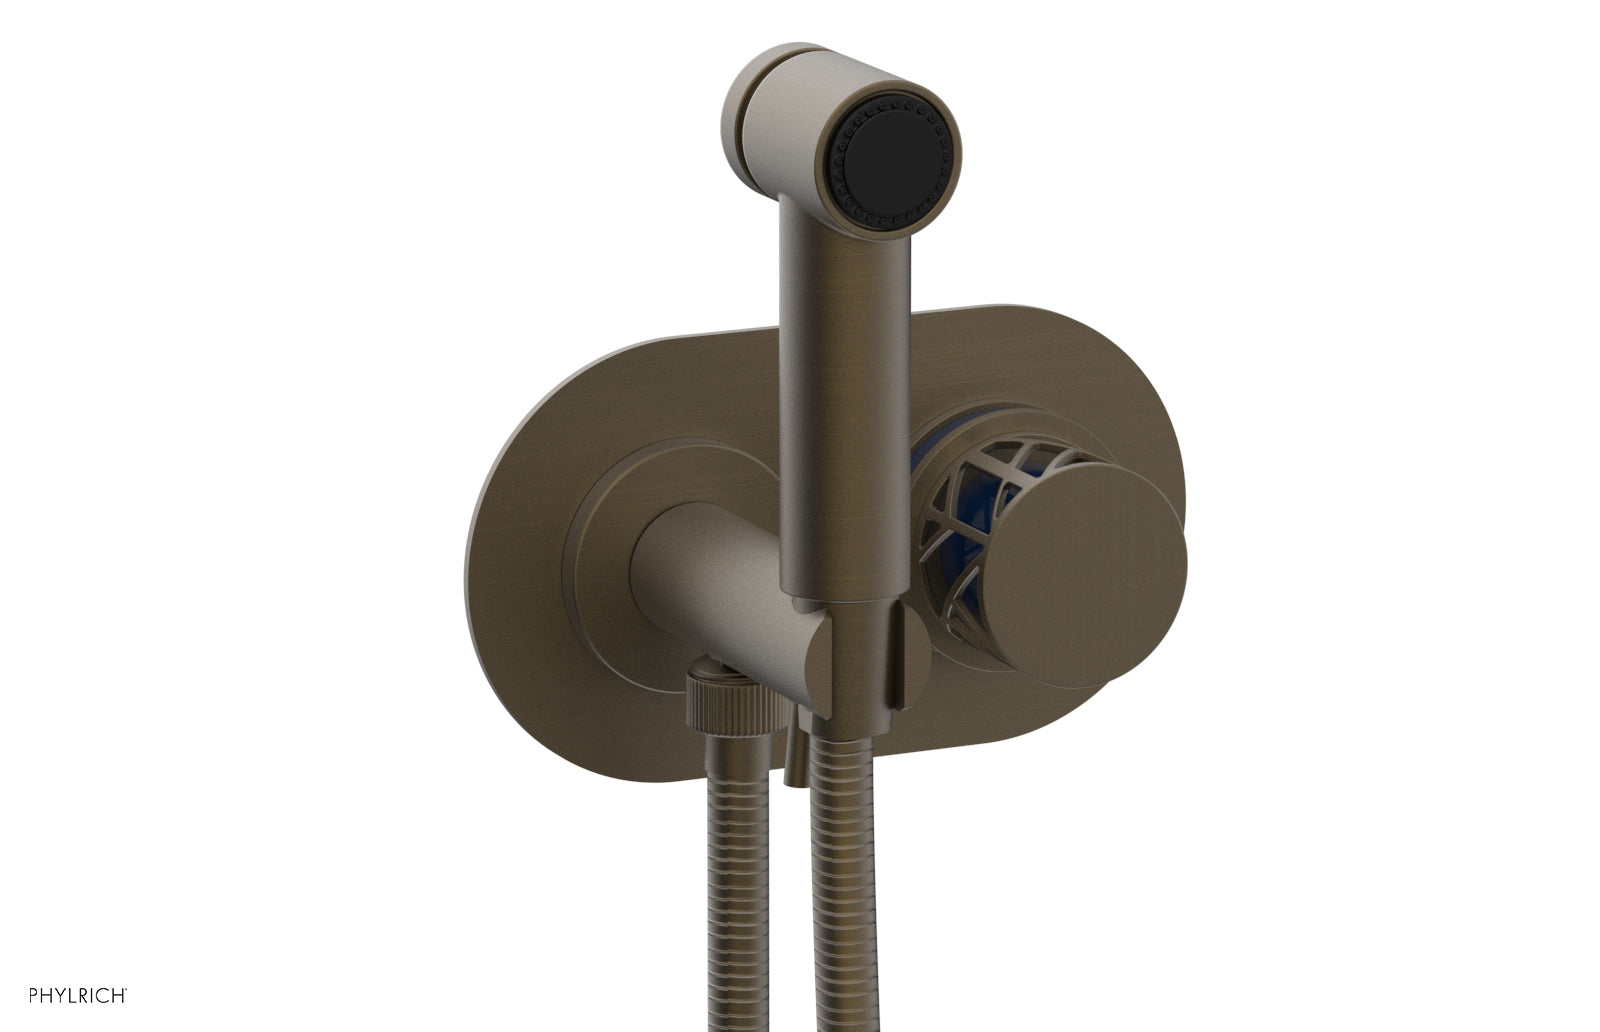 Phylrich JOLIE Wall Mounted Bidet, Round Handle with "Navy Blue" Accents